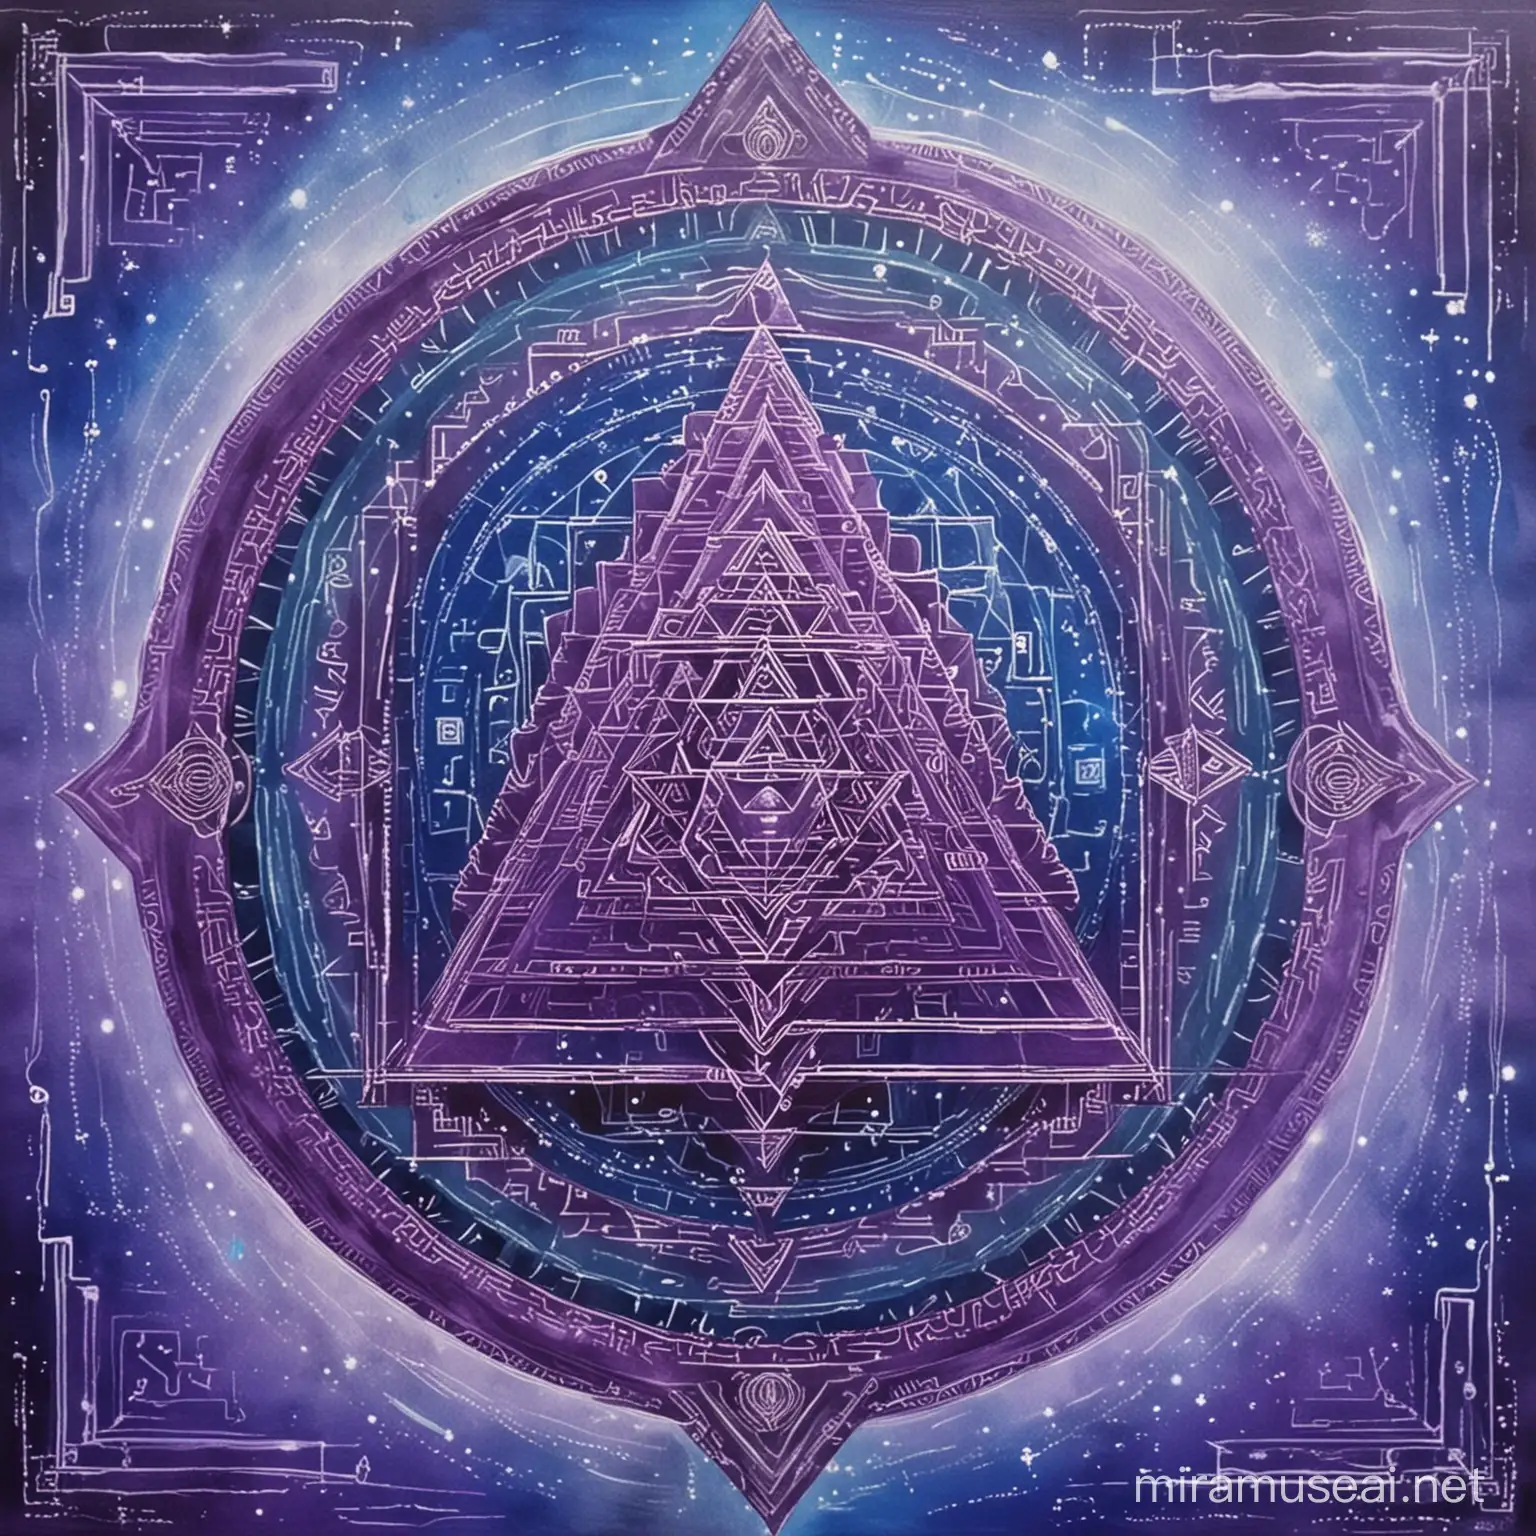 create an artwork that encompasses the notion of someone being connected to something greater than themselves. make it otherworldy and divine. please theme the colours deep blue and purple, a sri yantra and a connection to something greater than ourselves